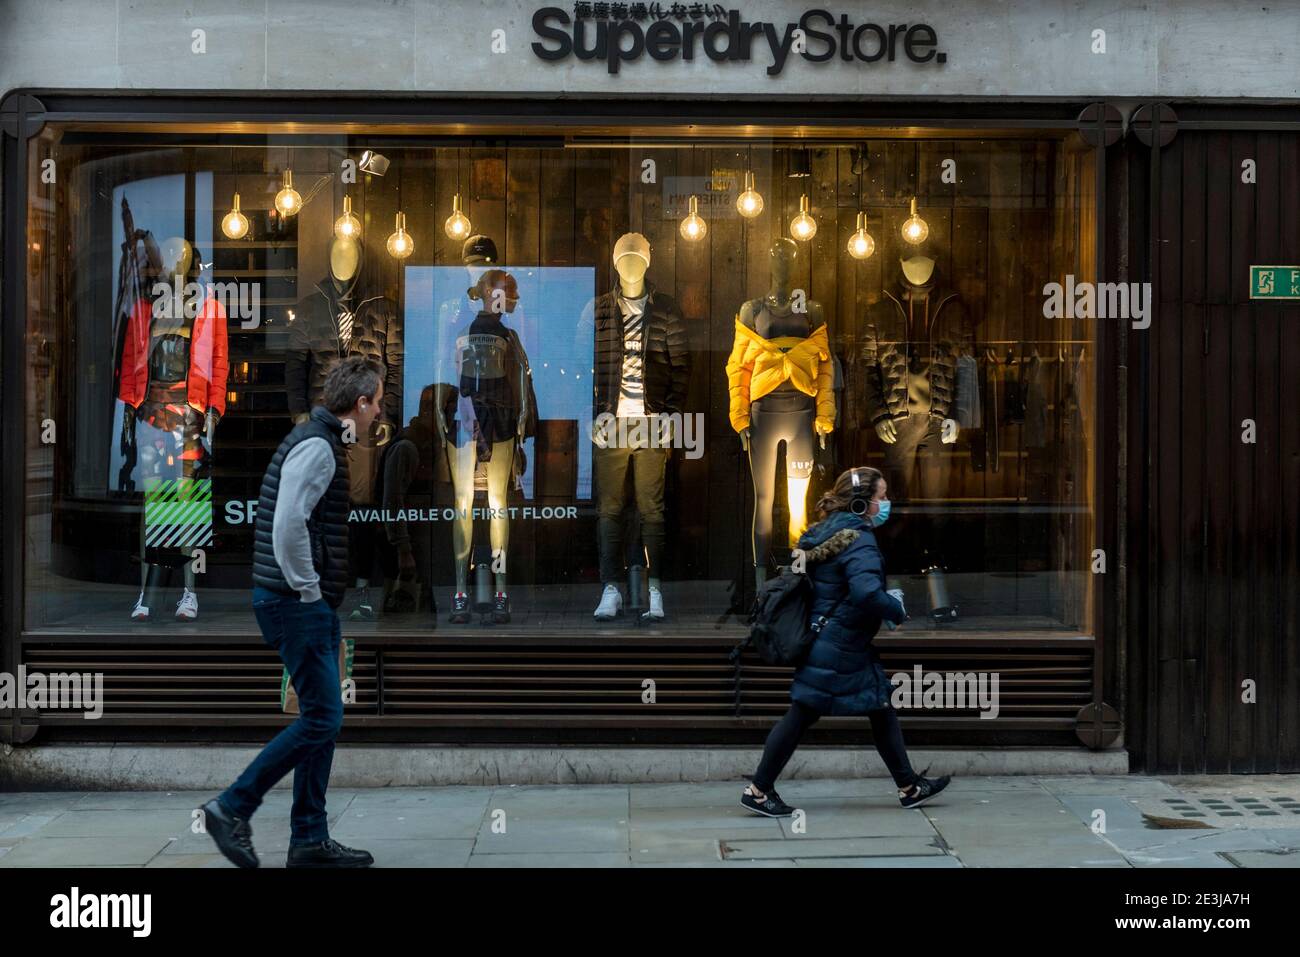 Superdry Regent Street High Resolution Stock Photography and Images - Alamy